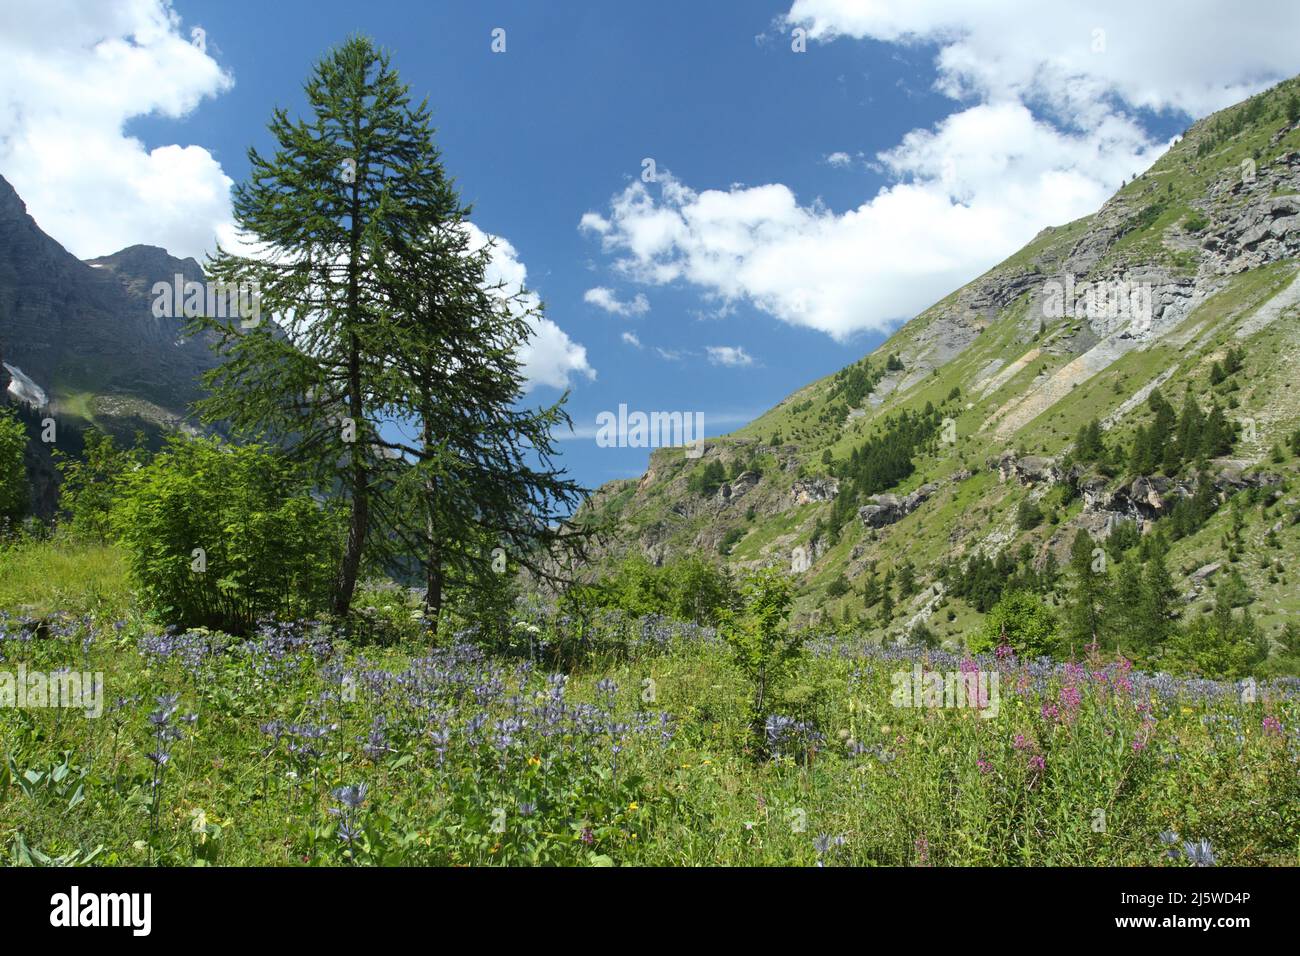 Sea Holly - Eryngium - flowers in a french alpine valley, landscape Stock Photo